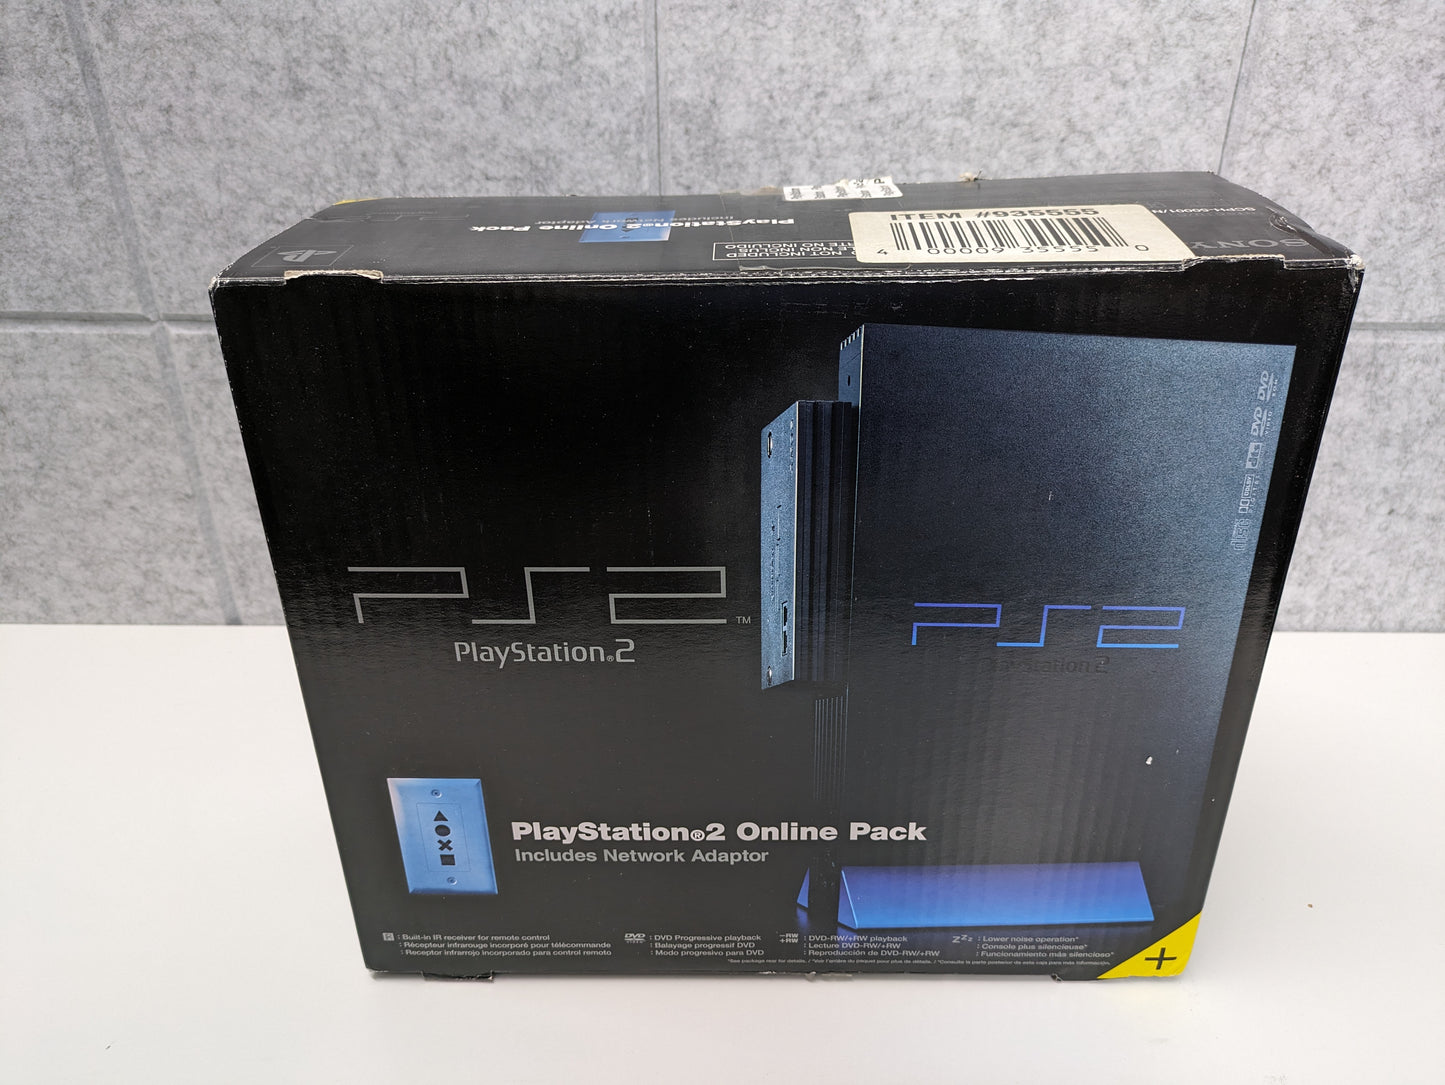 Sony PlayStation 2 PS2 Online Combo Pack w/ Controller & Cords - USED (CIB) (GG22)